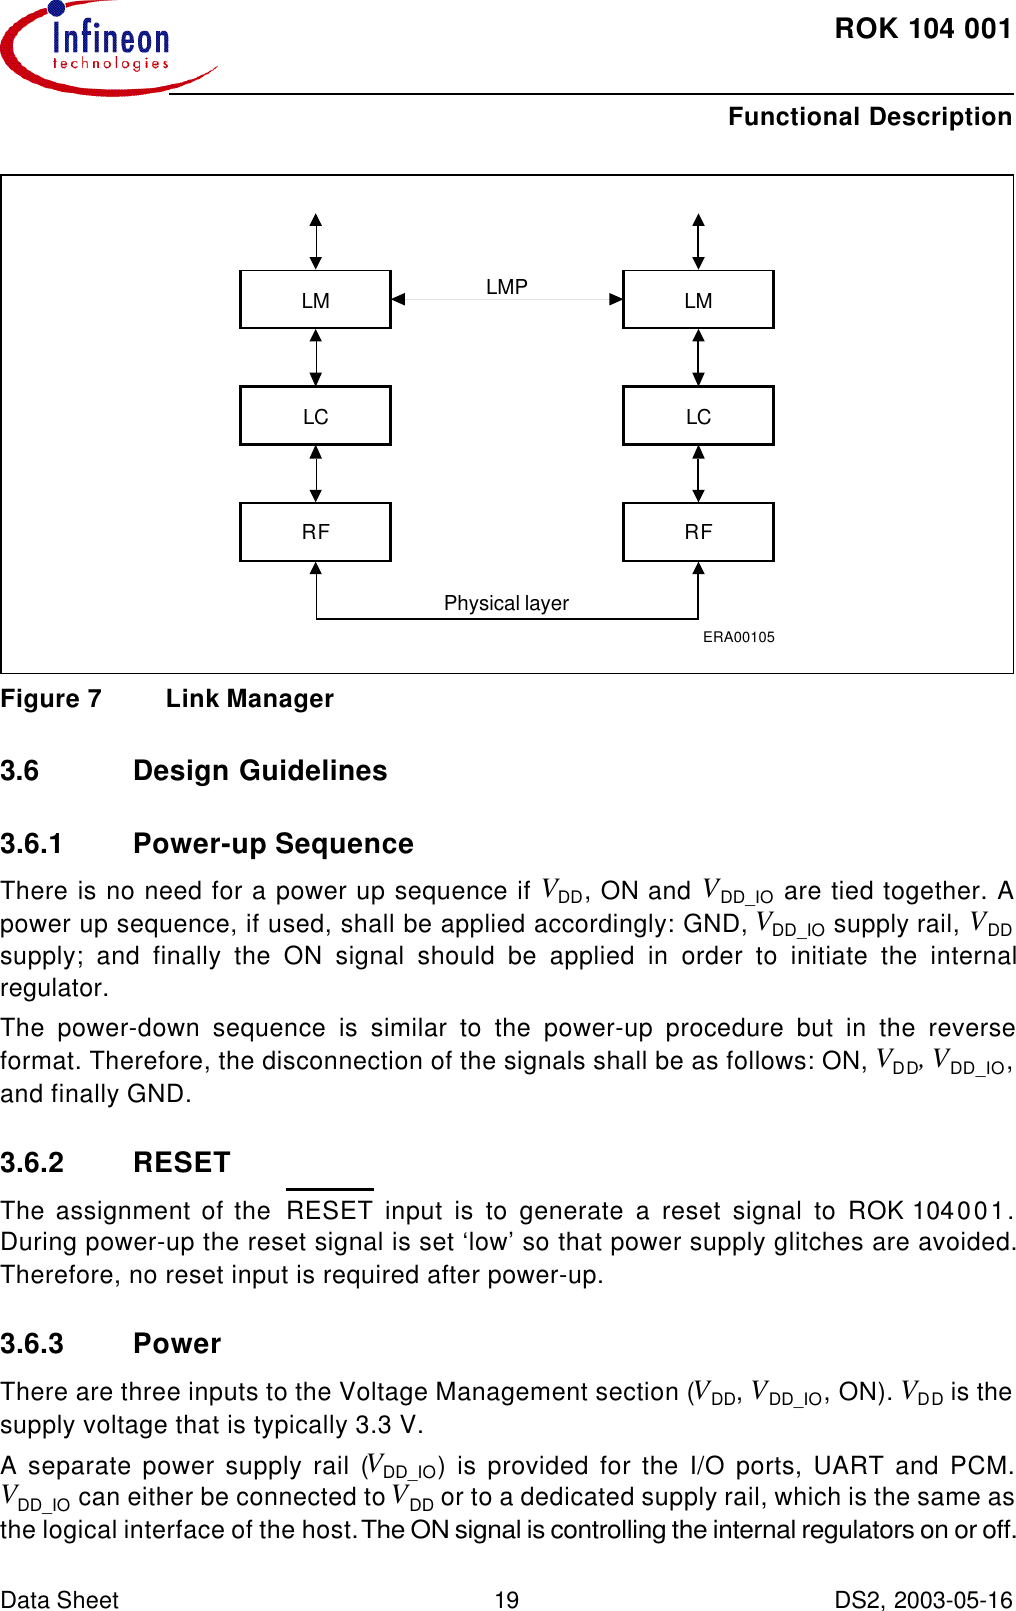 ROK104001Functional Description Data Sheet 19 DS2, 2003-05-16  Figure7 Link Manager3.6 Design Guidelines3.6.1 Power-up SequenceThere is no need for a power up sequence if VDD, ON and VDD_IO are tied together. Apower up sequence, if used, shall be applied accordingly: GND, VDD_IO supply rail, VDDsupply; and finally the ON signal should be applied in order to initiate the internalregulator.The power-down sequence is similar to the power-up procedure but in the reverseformat. Therefore, the disconnection of the signals shall be as follows: ON, VDD, VDD_IO,and finally GND.3.6.2 RESETThe assignment of the  RESET input is to generate a reset signal to ROK104001.During power-up the reset signal is set ‘low’ so that power supply glitches are avoided.Therefore, no reset input is required after power-up.3.6.3 PowerThere are three inputs to the Voltage Management section (VDD, VDD_IO, ON). VDD is thesupply voltage that is typically 3.3 V.A separate power supply rail (VDD_IO) is provided for the I/O ports, UART and PCM.VDD_IO can either be connected to VDD or to a dedicated supply rail, which is the same asthe logical interface of the host. The ON signal is controlling the internal regulators on or off.ERA00105LMLCRFLMLCRFPhysical layerLMP